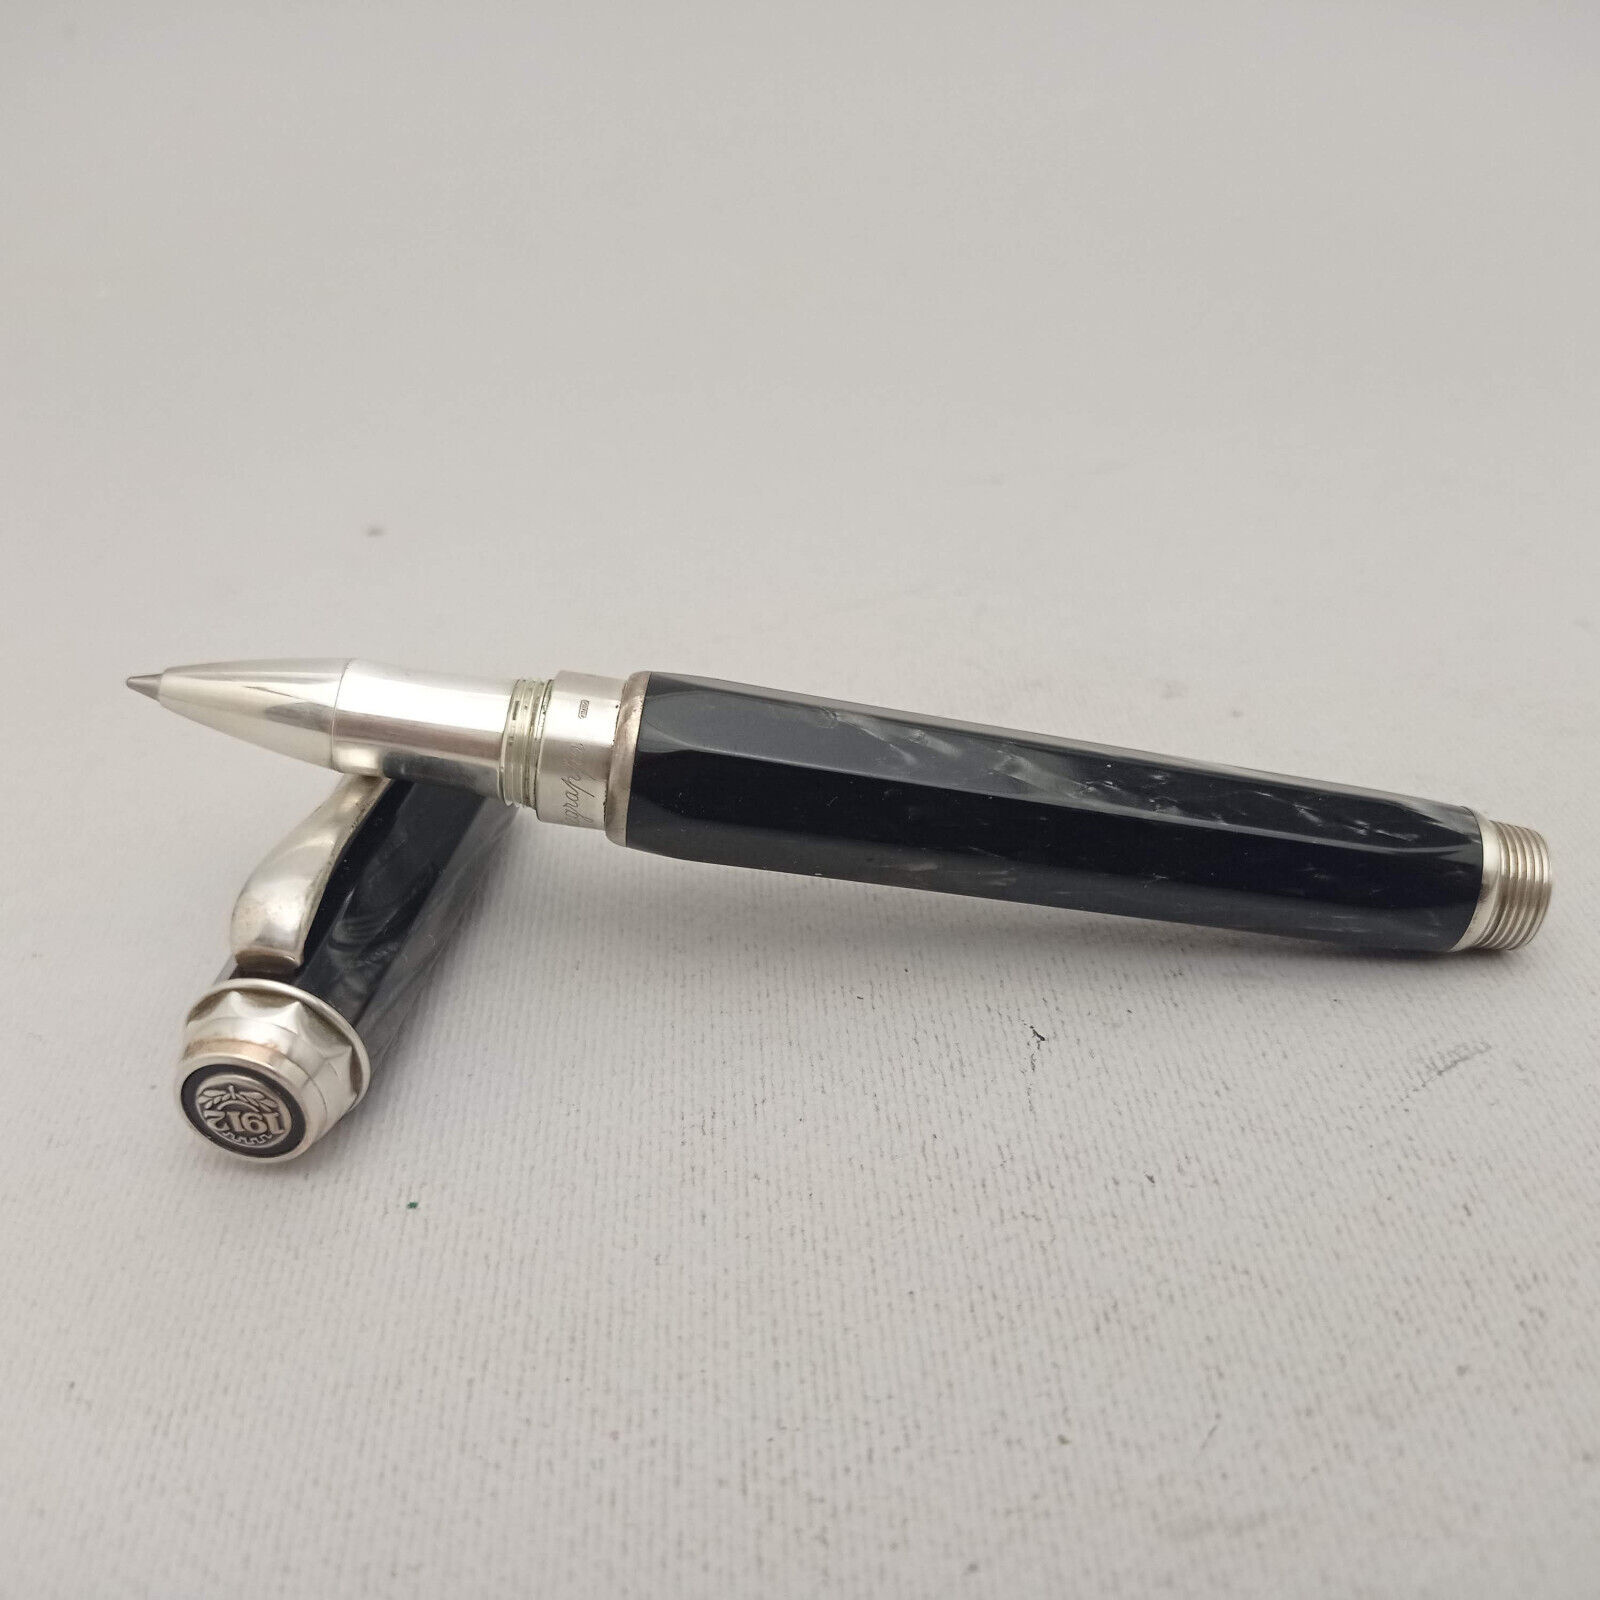 MONTEGRAPPA EMBLEMA ROLLERBALL PEN STERLING SILVER CHARCOAL CELLULOID VINTAGE